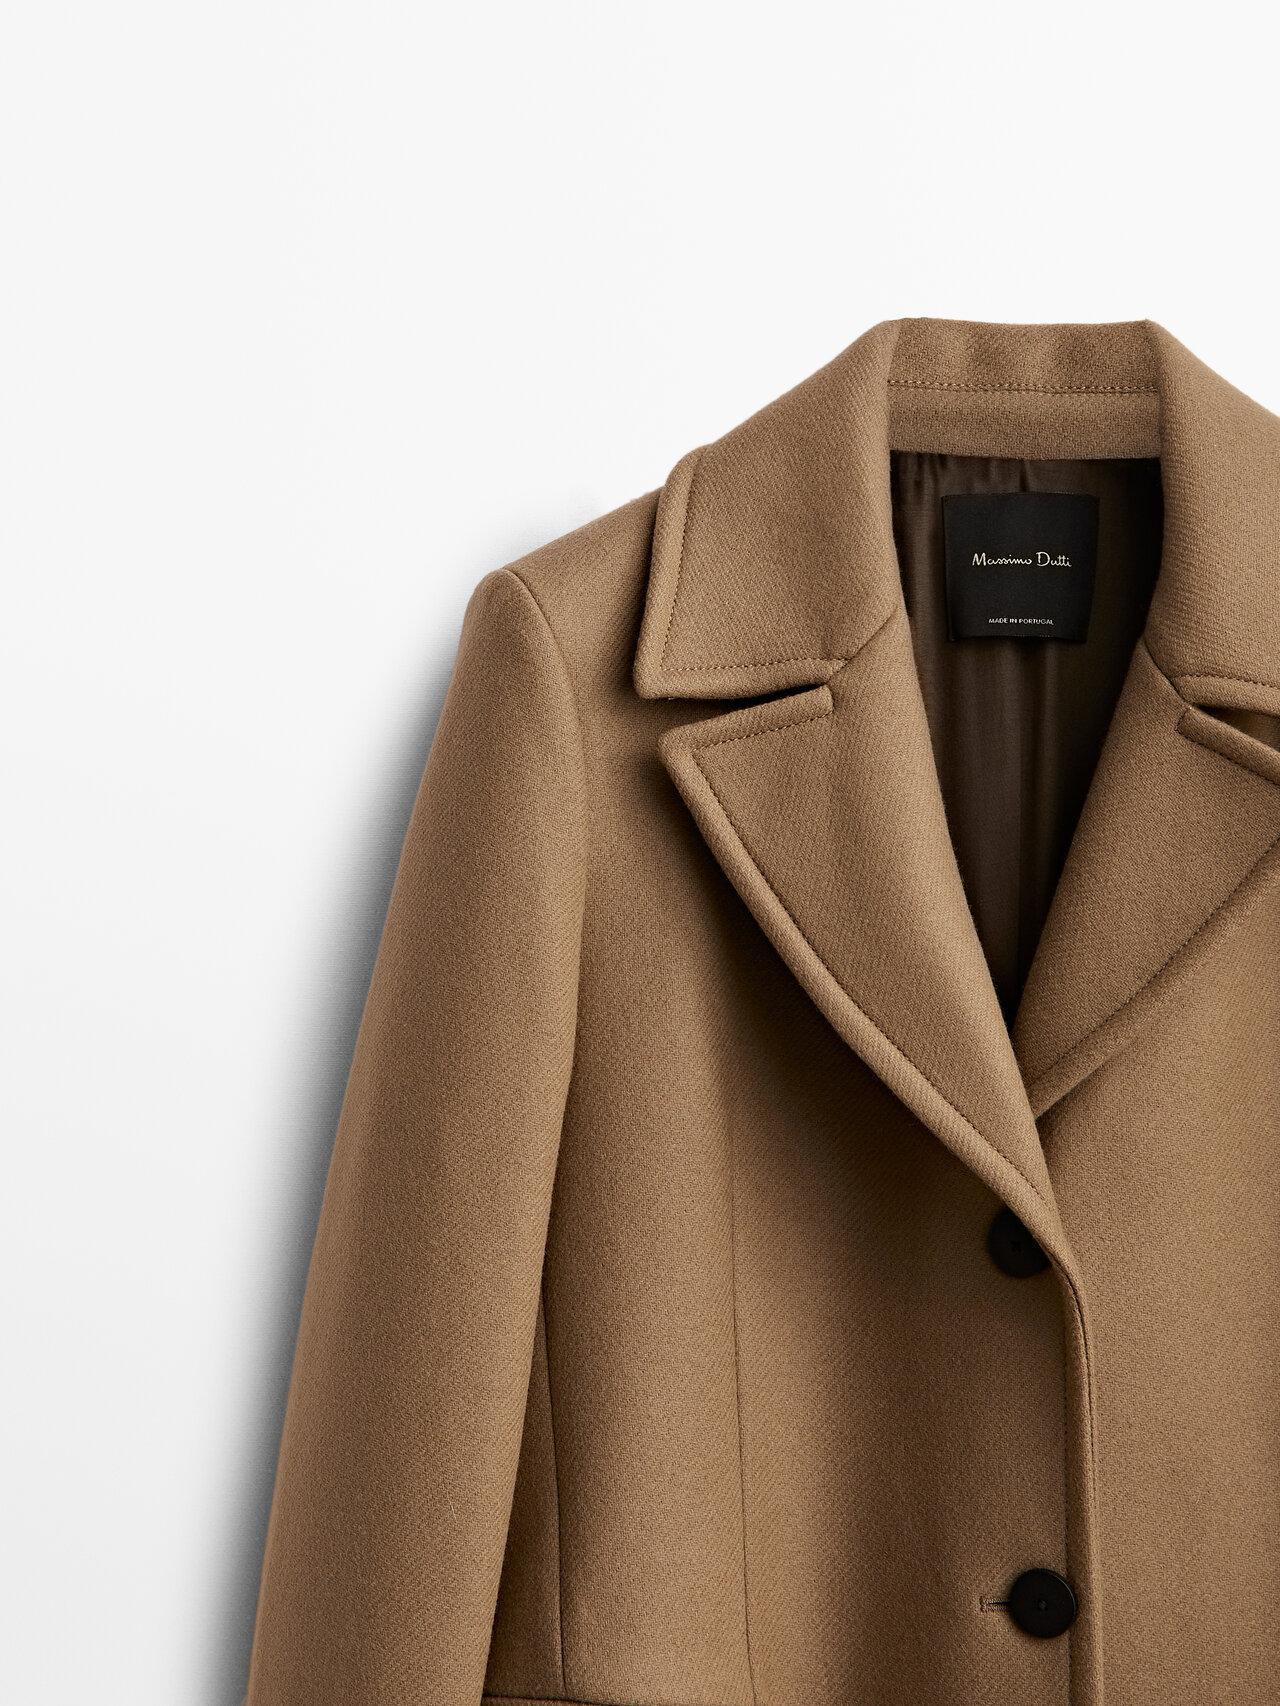 MASSIMO DUTTI Fitted Wool Blend Coat in Natural | Lyst